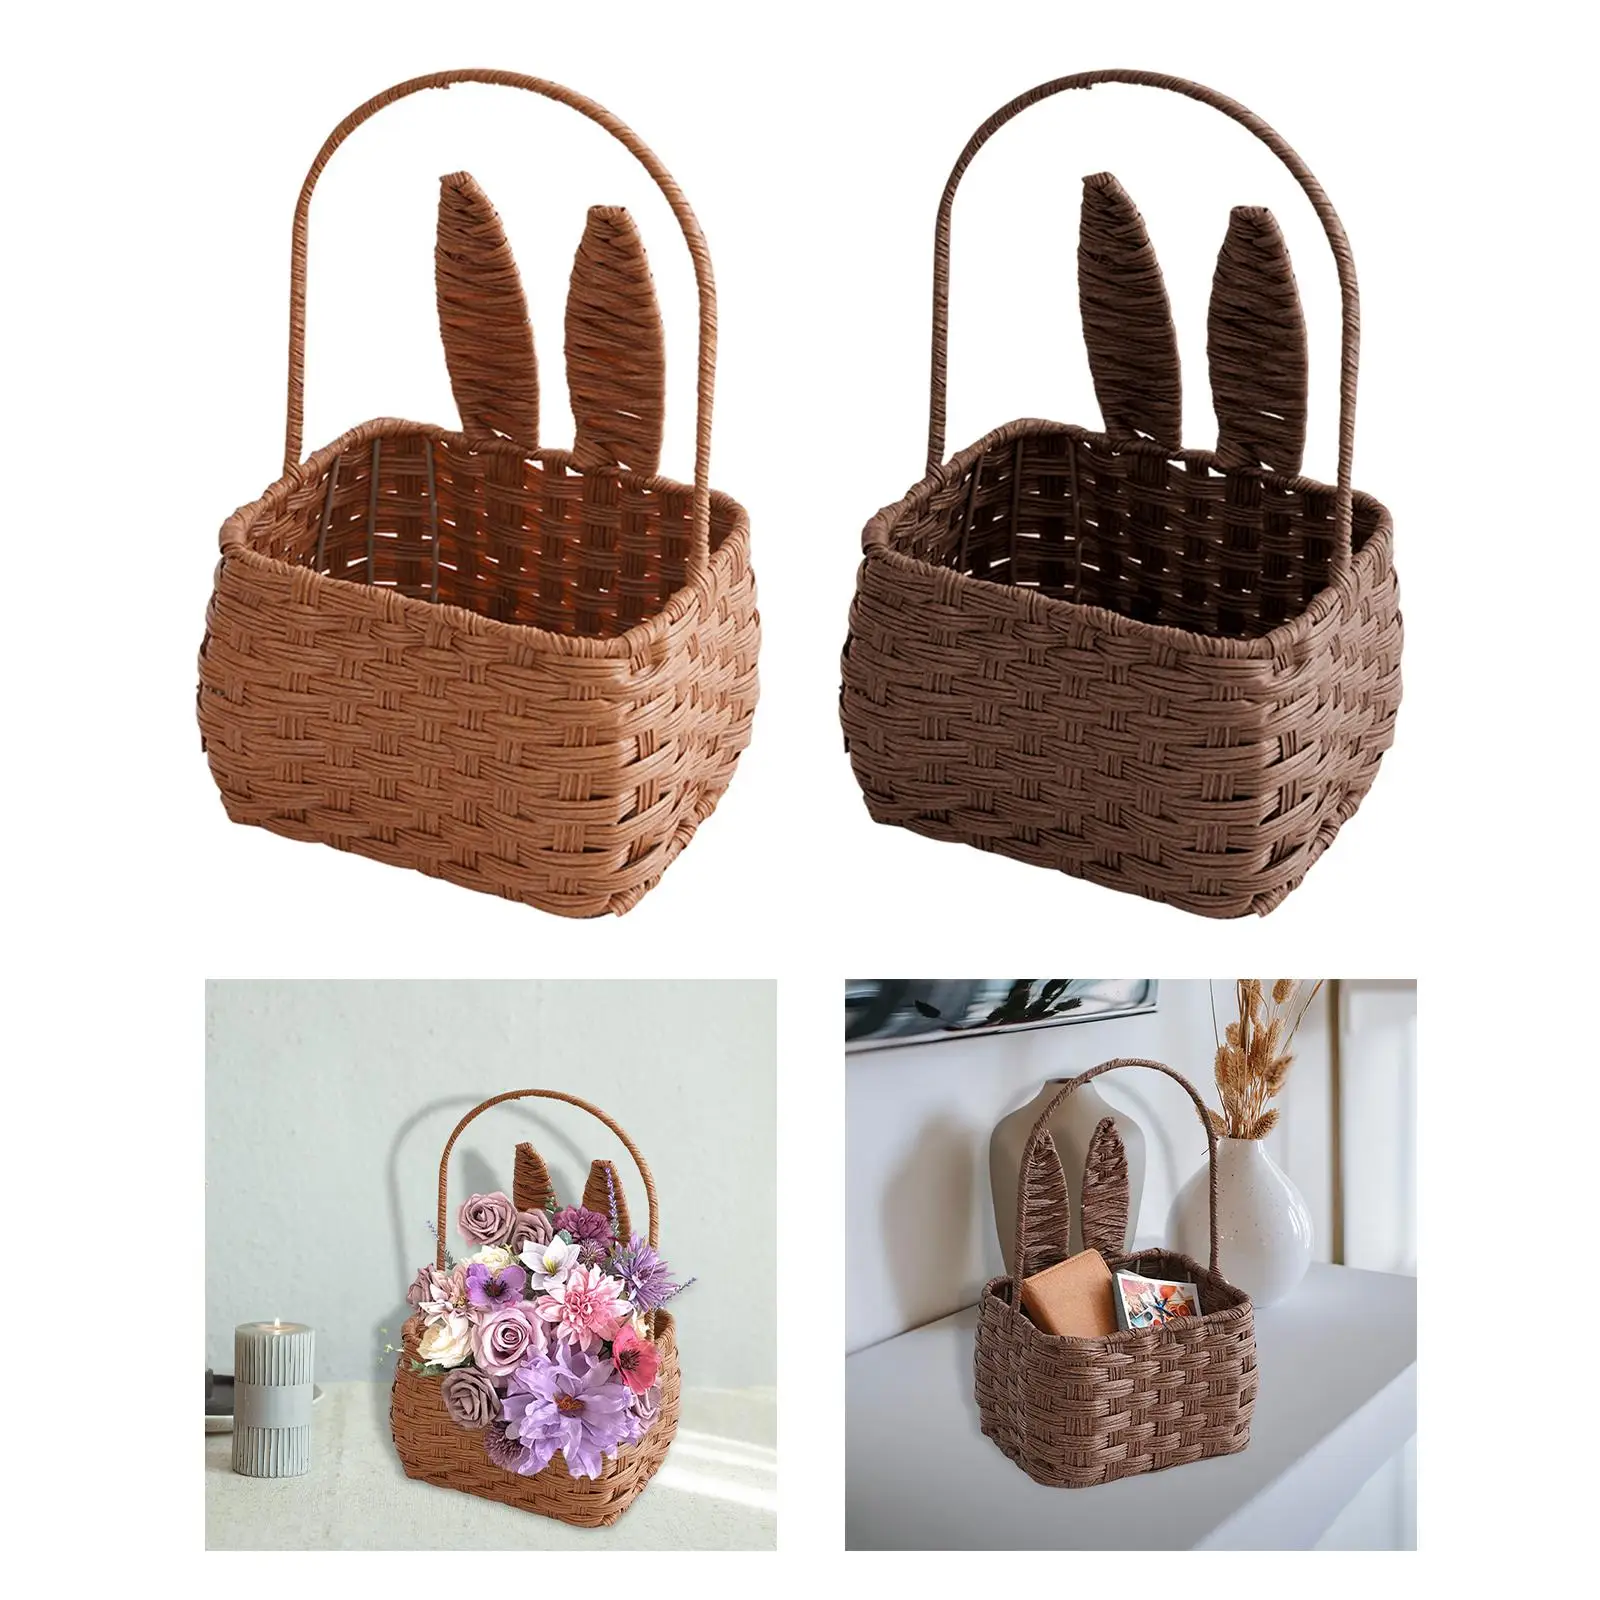 Portable Rabbit Ears Picnic Basket Handmade Best Gift Makeup Organizer with Handle Wicker Box for Camping Family Home Decoration images - 6